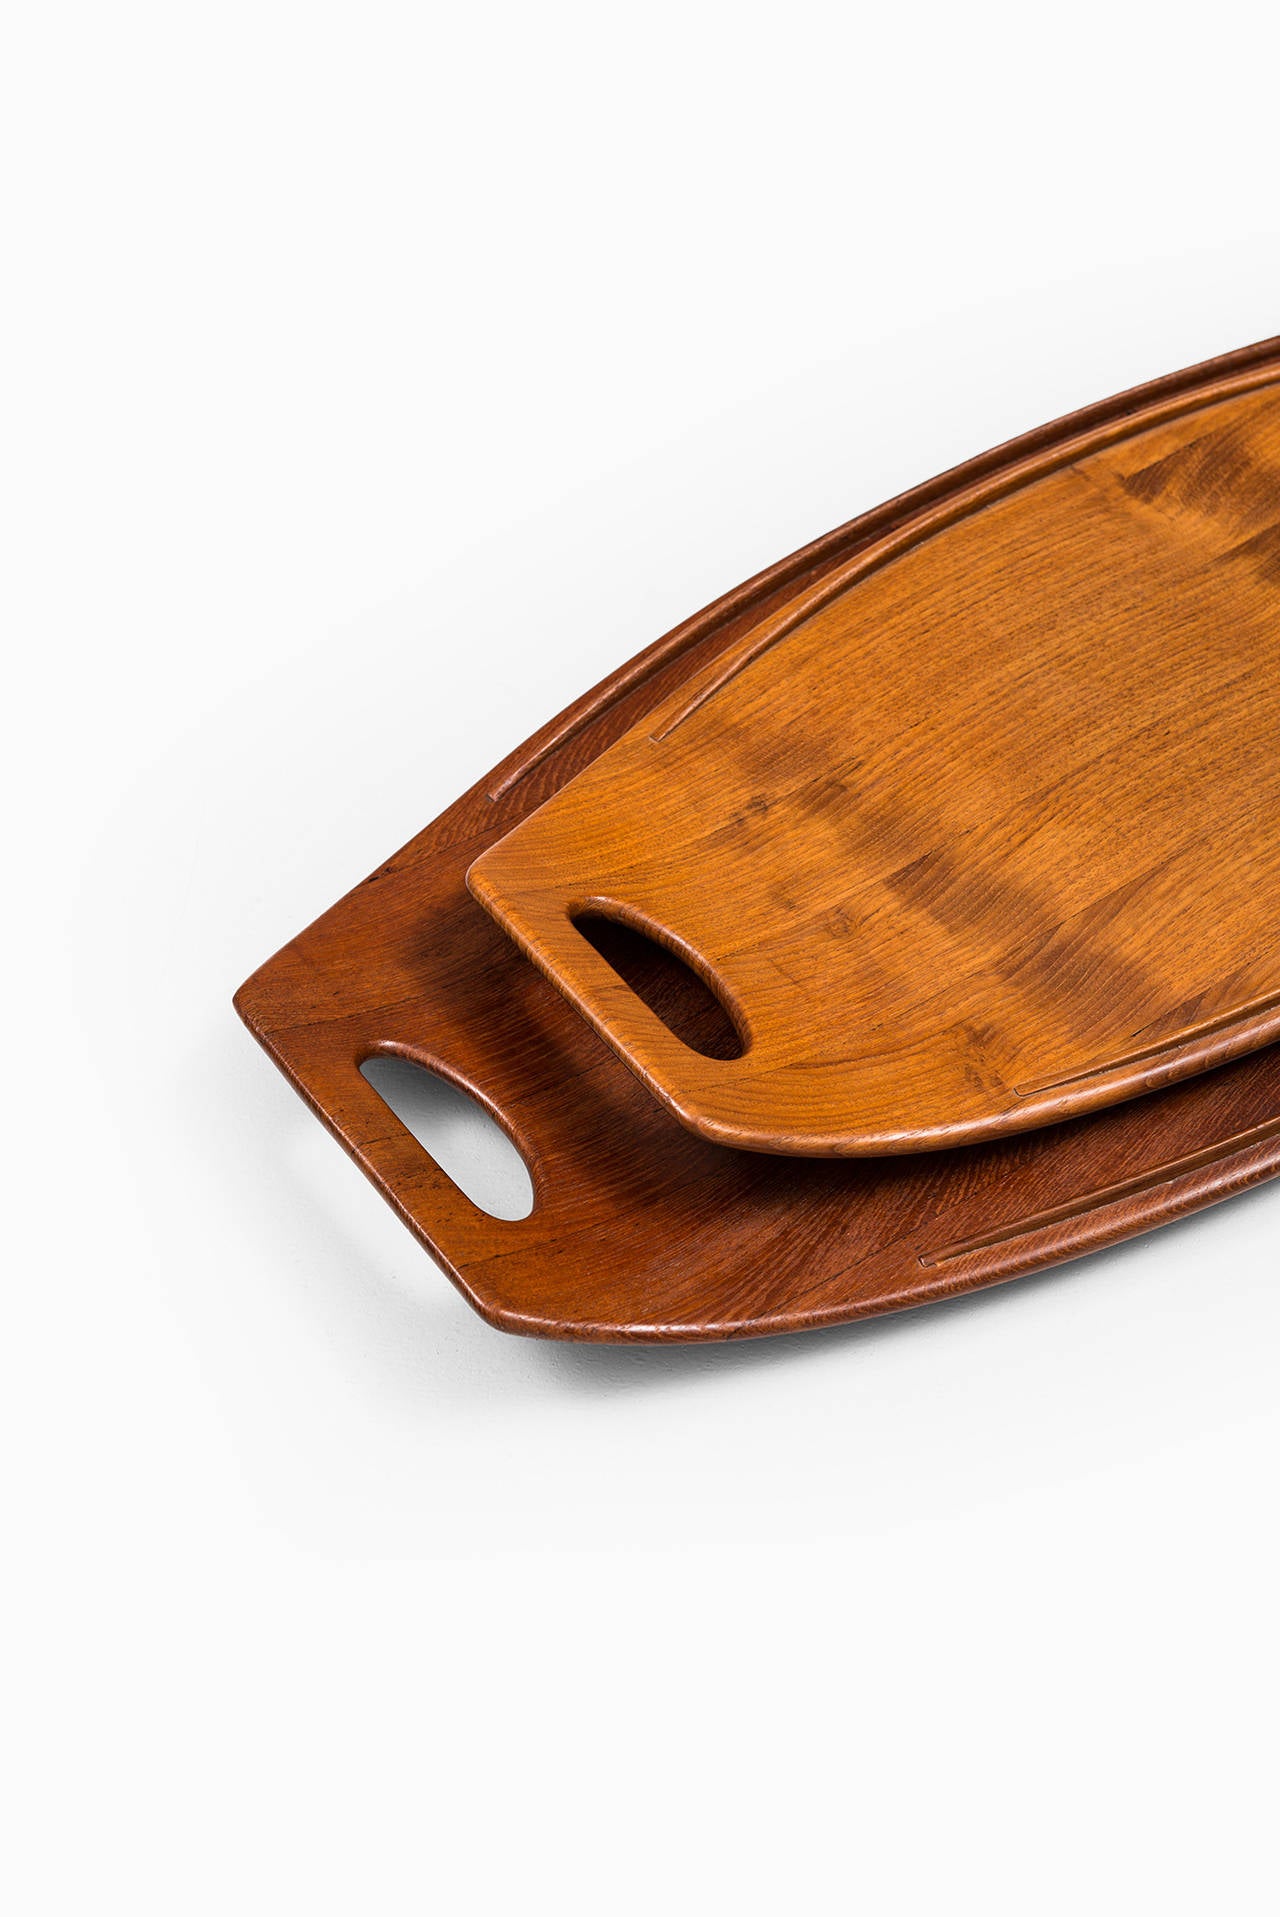 A pair of serving trays in teak designed by Jens Quistgaard. Produced by Dansk in Denmark. Big size: 850 €, small size: 650 €